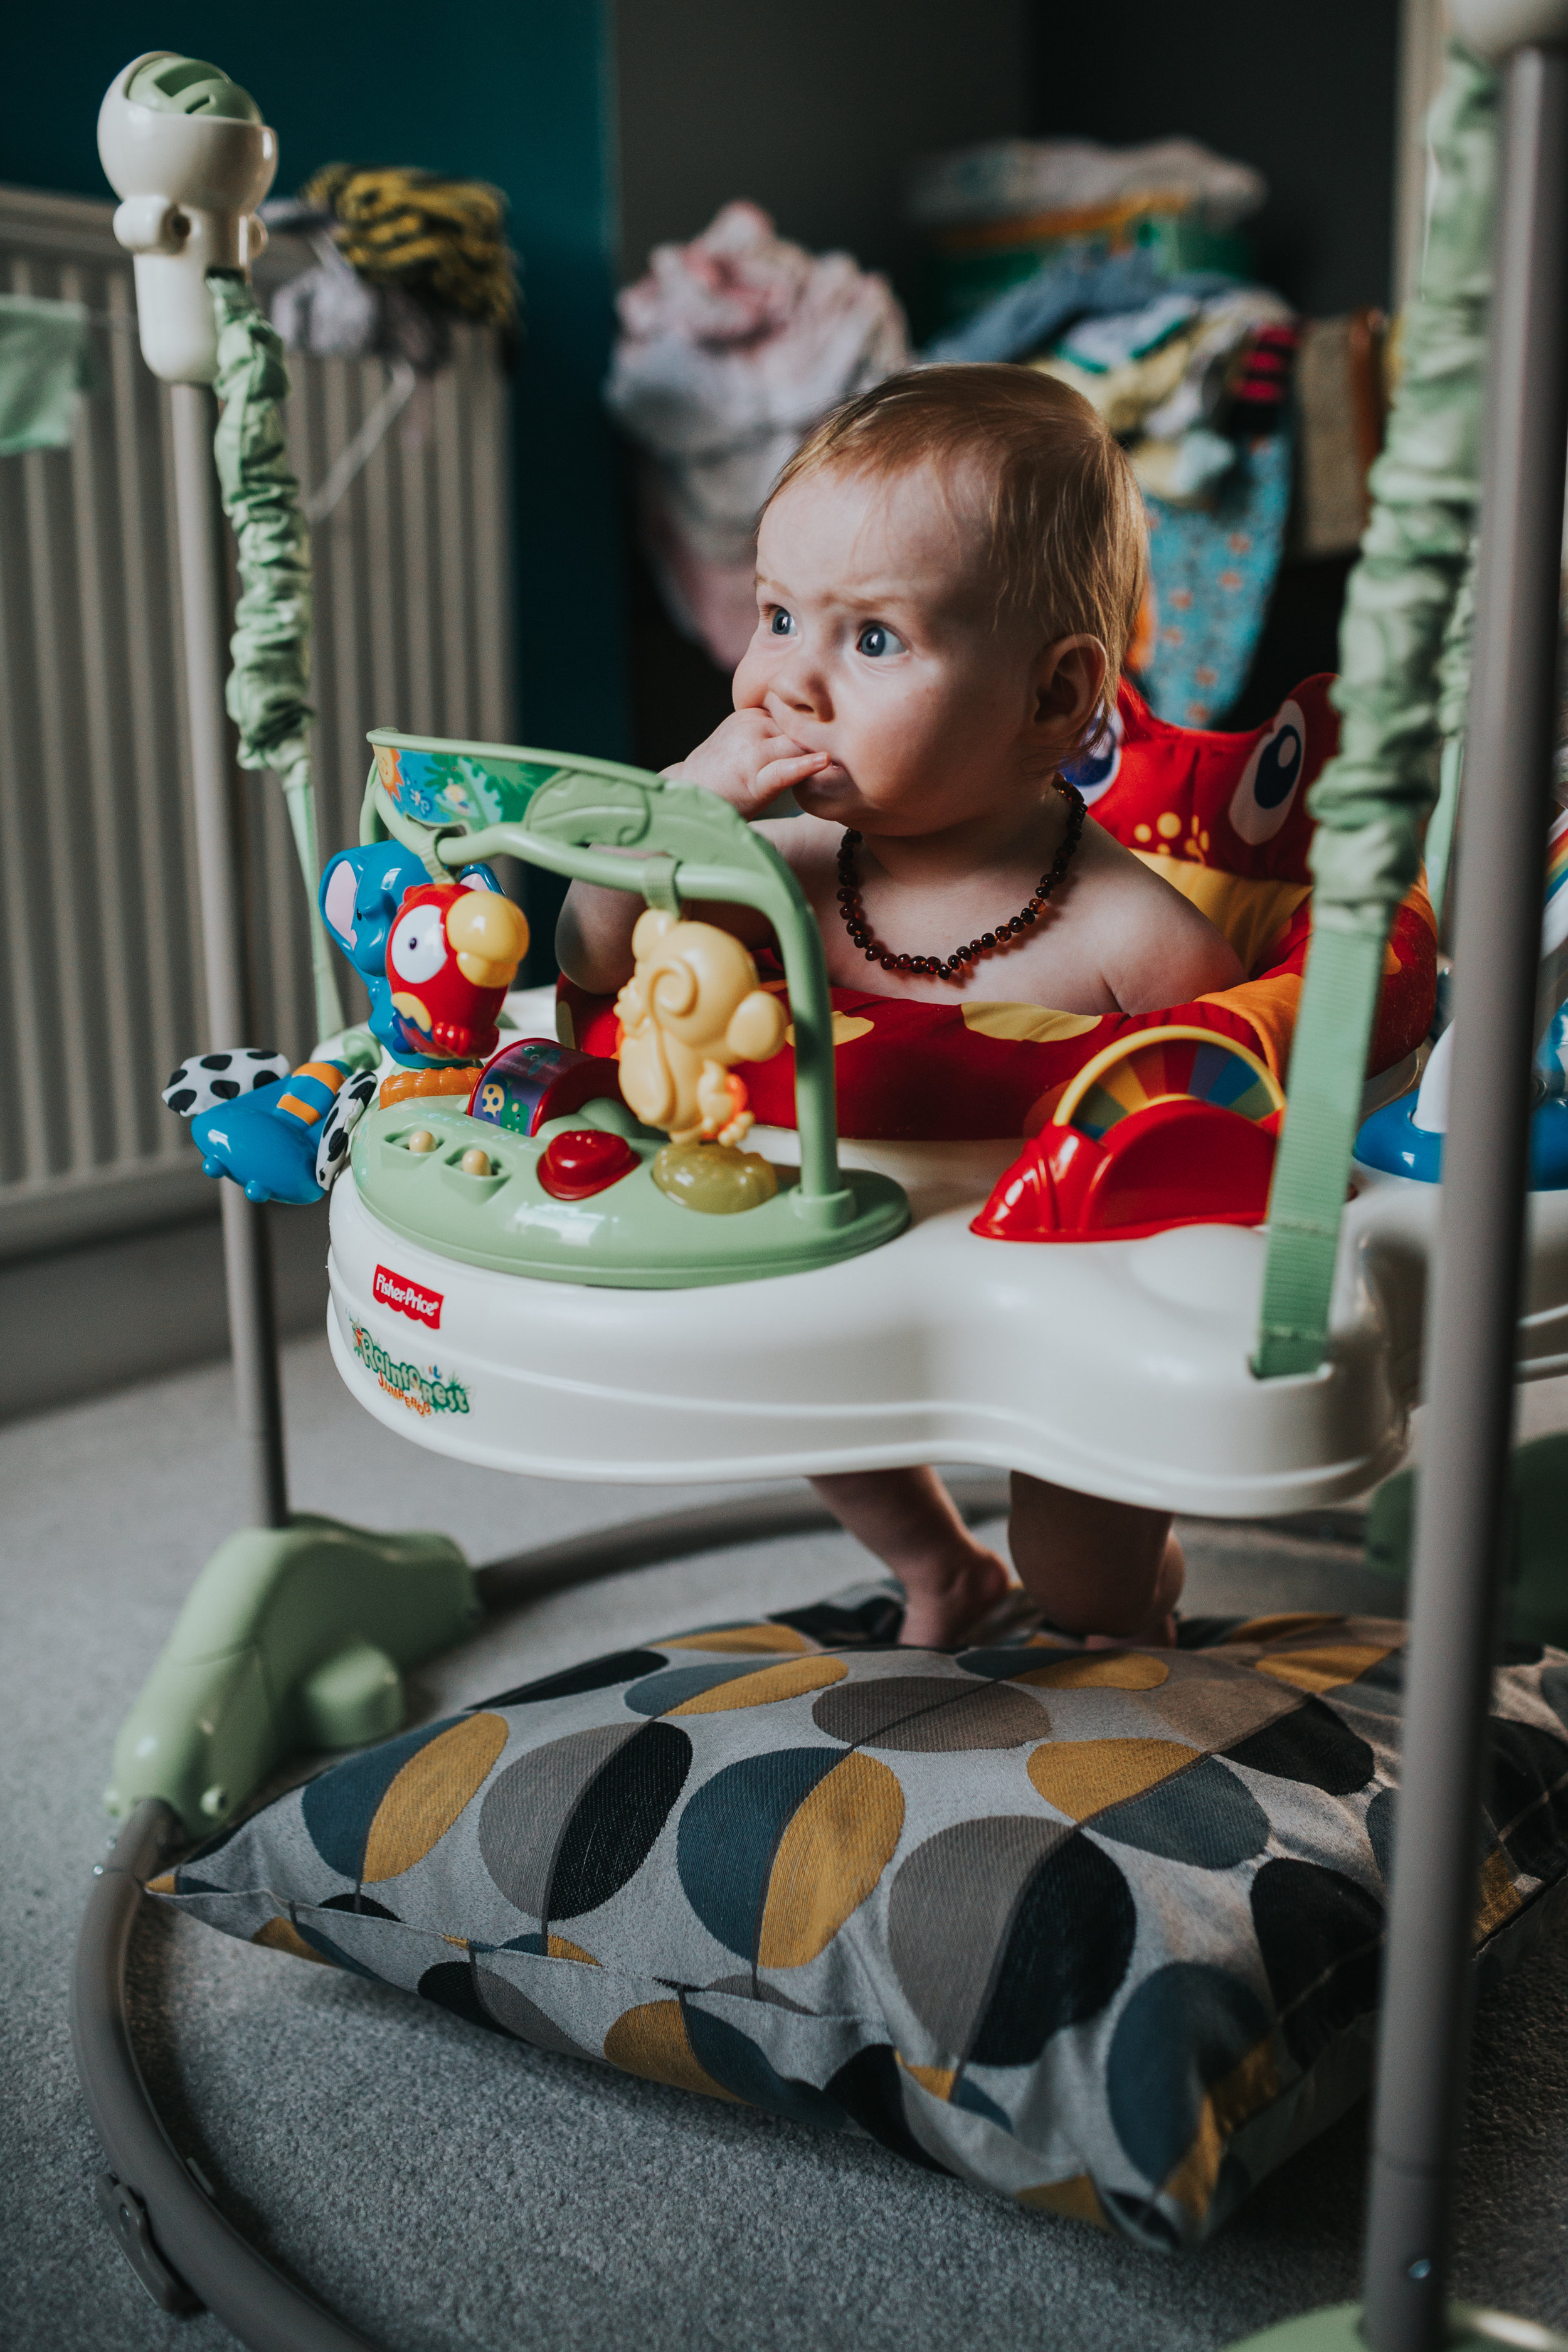 The baby sits in her walker she needs a cushion as her feet don't quite touch the floor yet. 